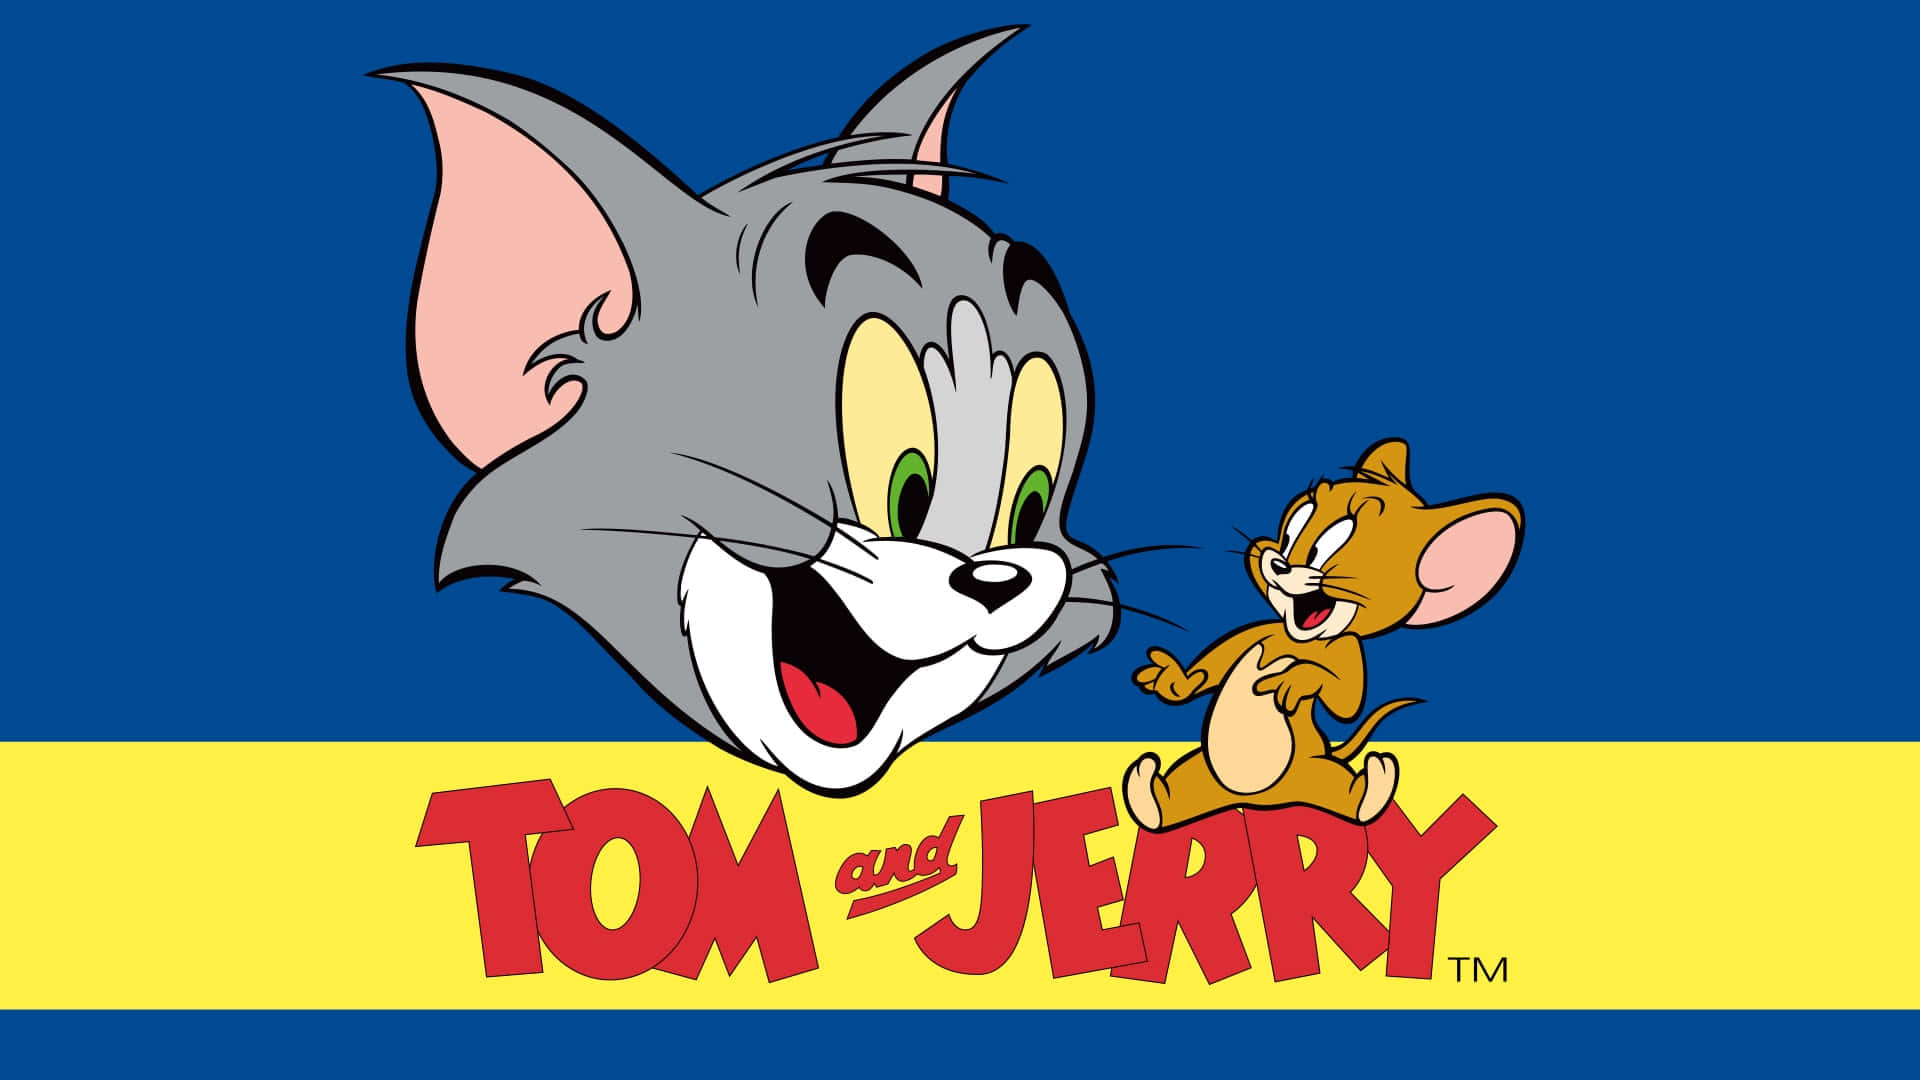 Tom and Jerry engage in a classic game of cat and mouse